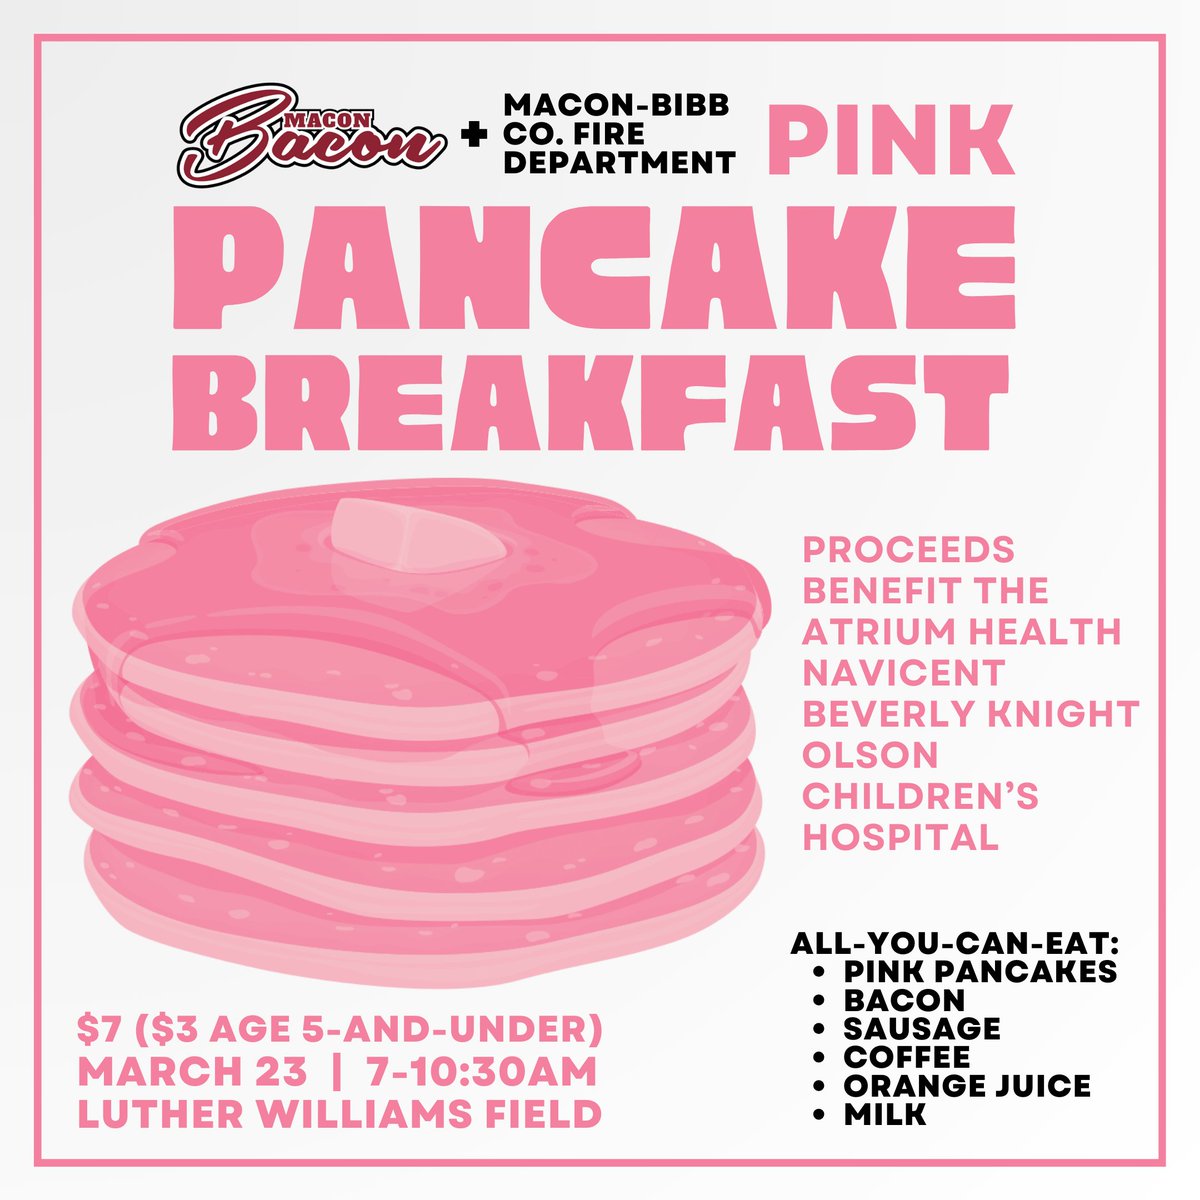 Our annual Pink Pancake Breakfast is today! Come by Luther Williams Field for all the pink pancakes and bacon you can eat. Proceeds go towards purchasing Christmas gifts for patients at the Atrium Health Navicent Beverly Knight Olson Children's Hospital.